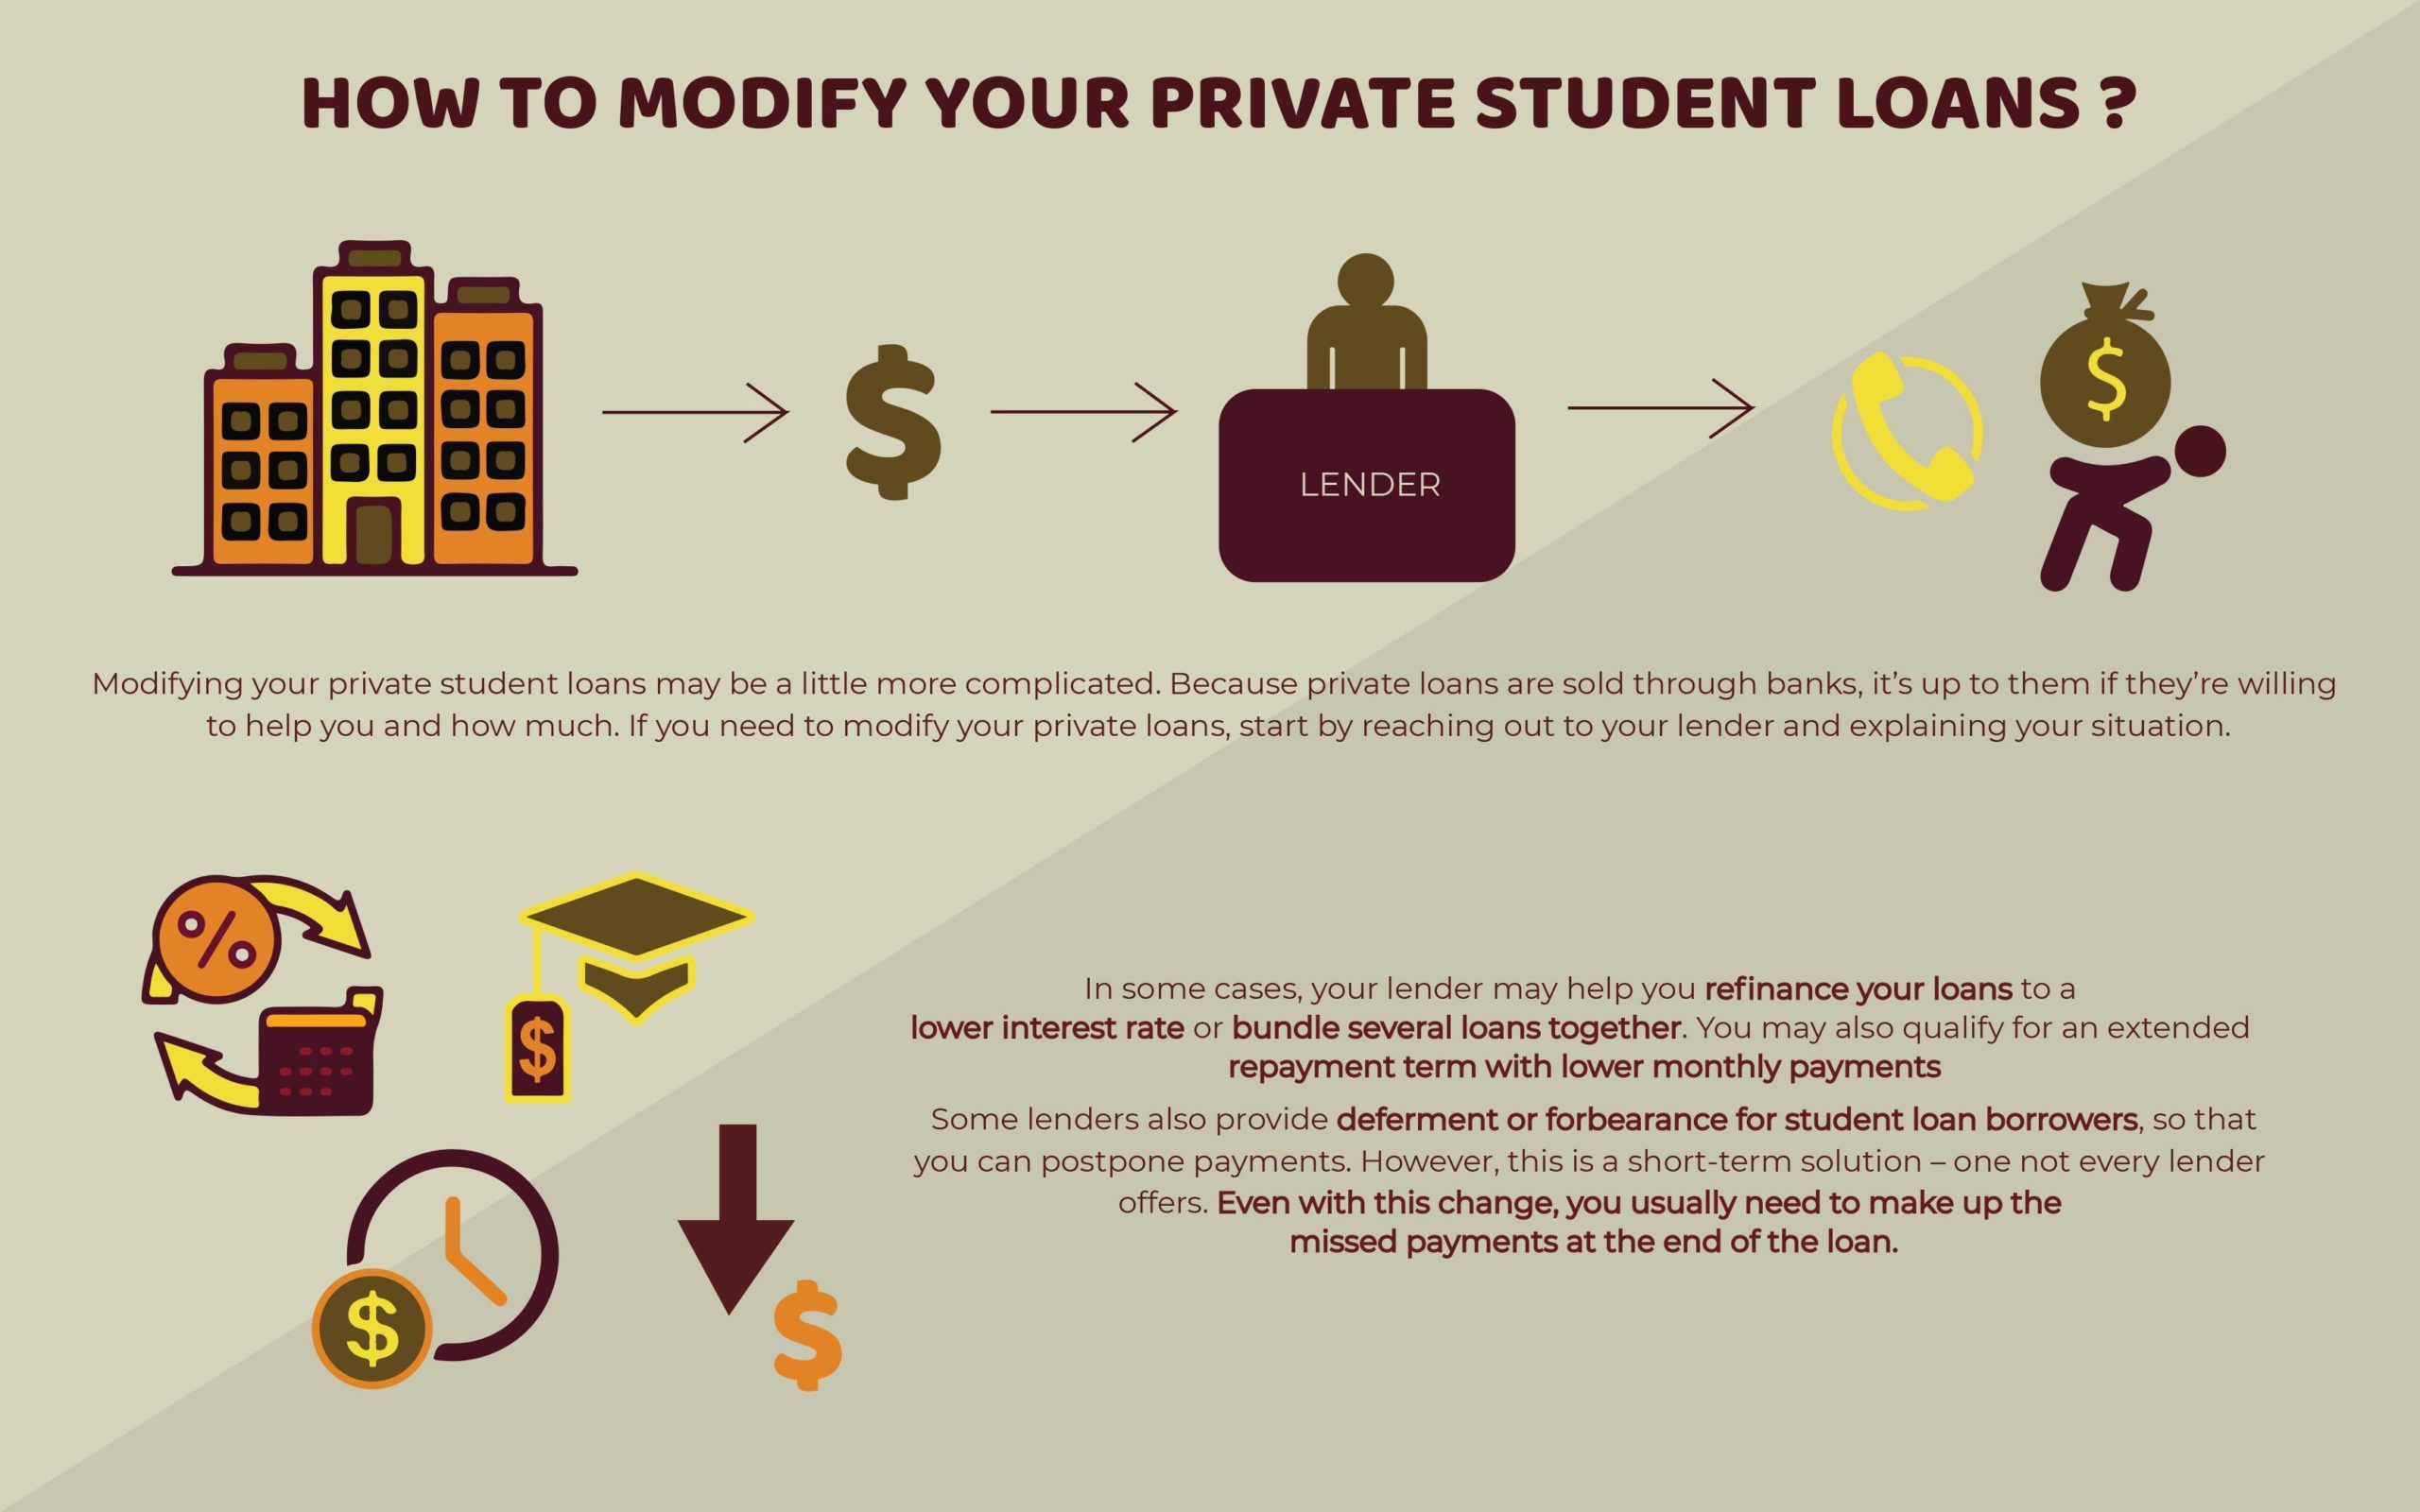 How to Modify Your Private Student Loans